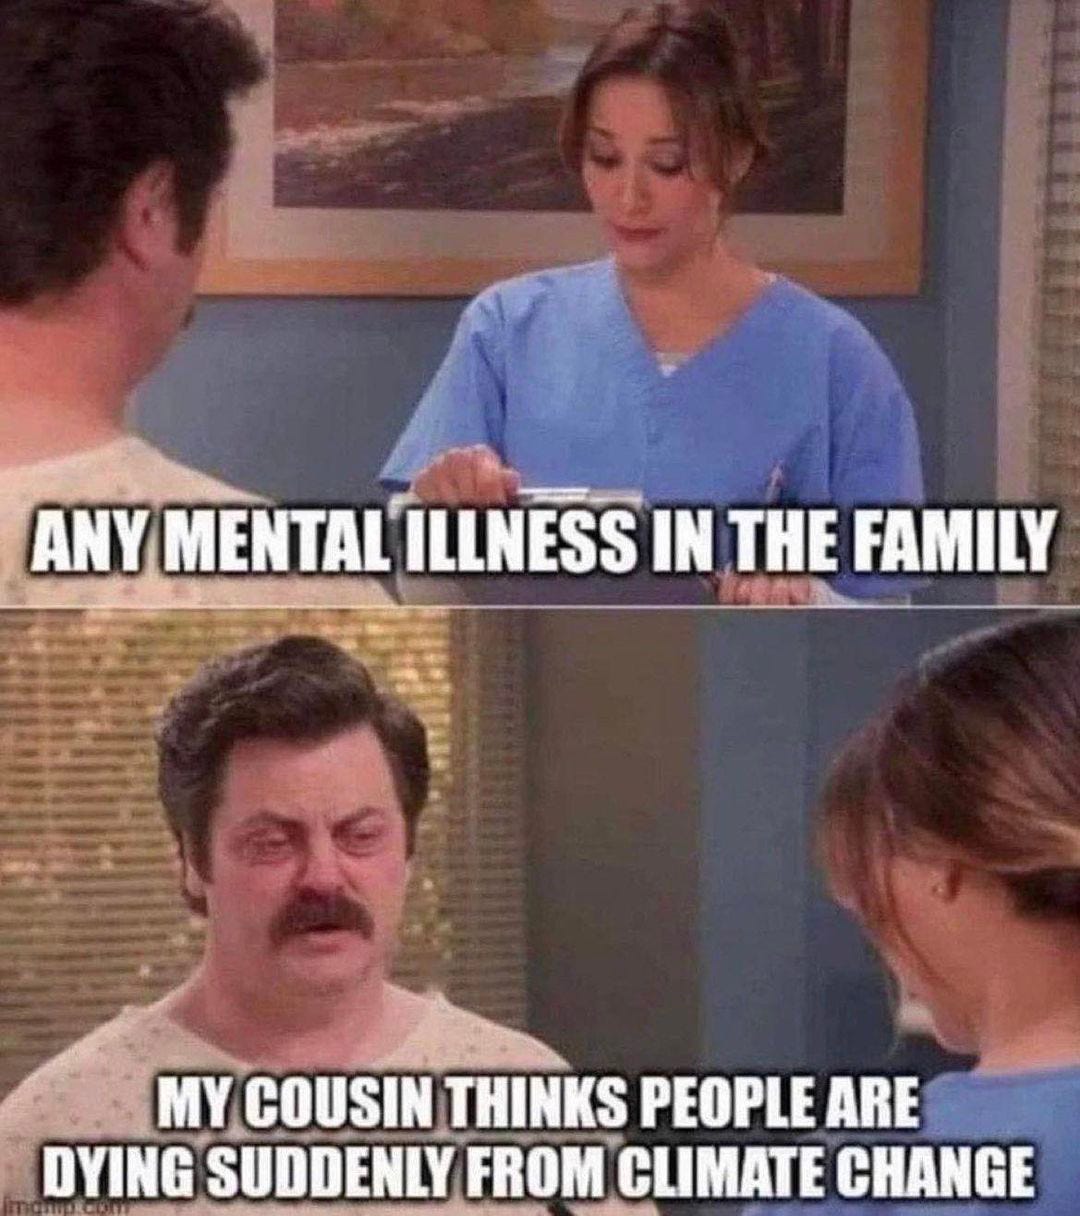 May be an image of 4 people and text that says 'ANY MENTAL ILLNESS IN THE FAMILY MY COUSIN THINKS PEOPLE ARE DYING SUDDENLY FROM CLIMATE CHANGE'